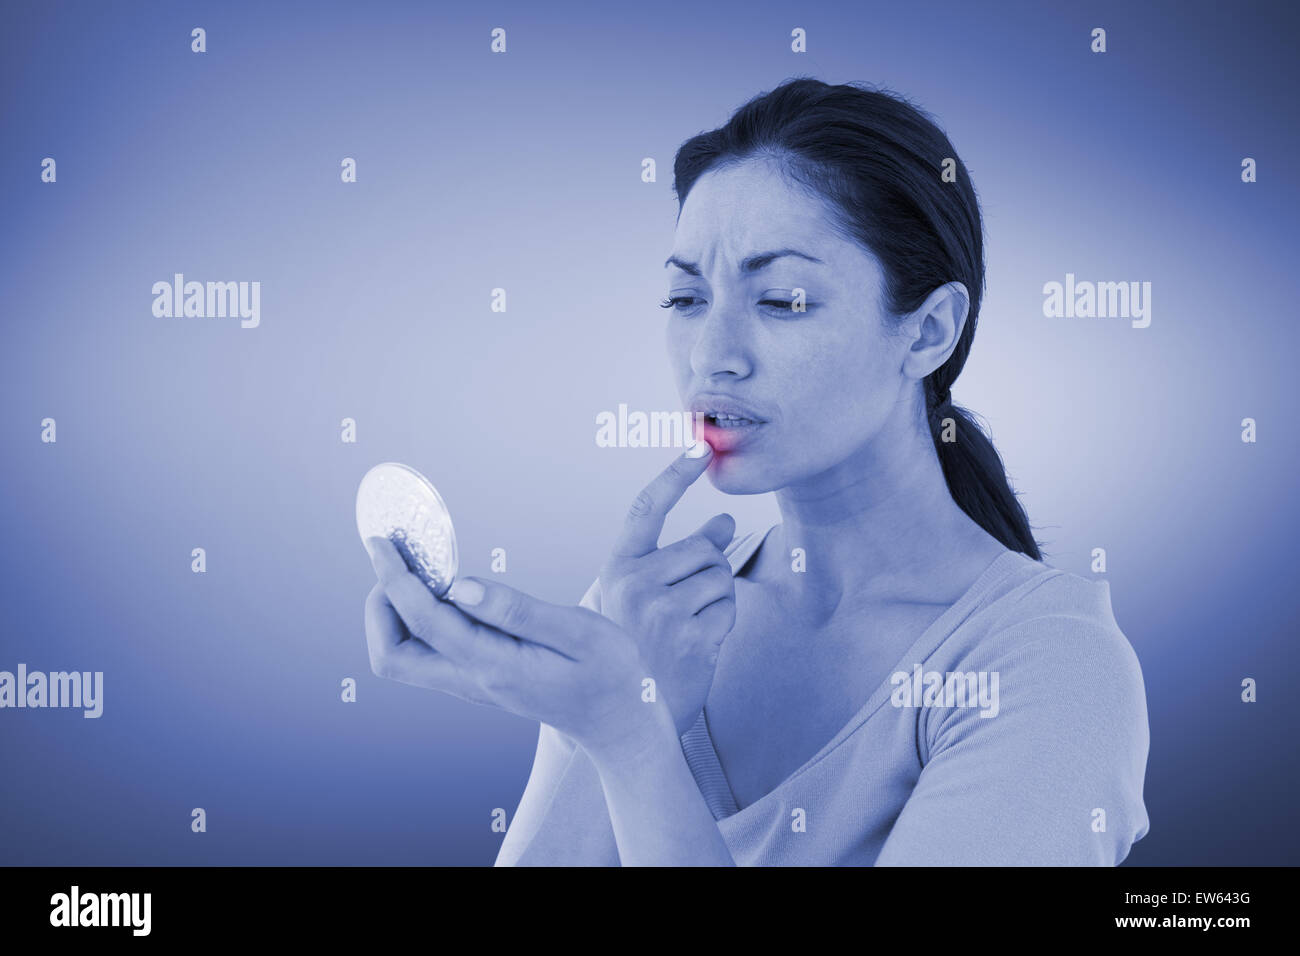 Composite image of worried woman looking at her lips Stock Photo